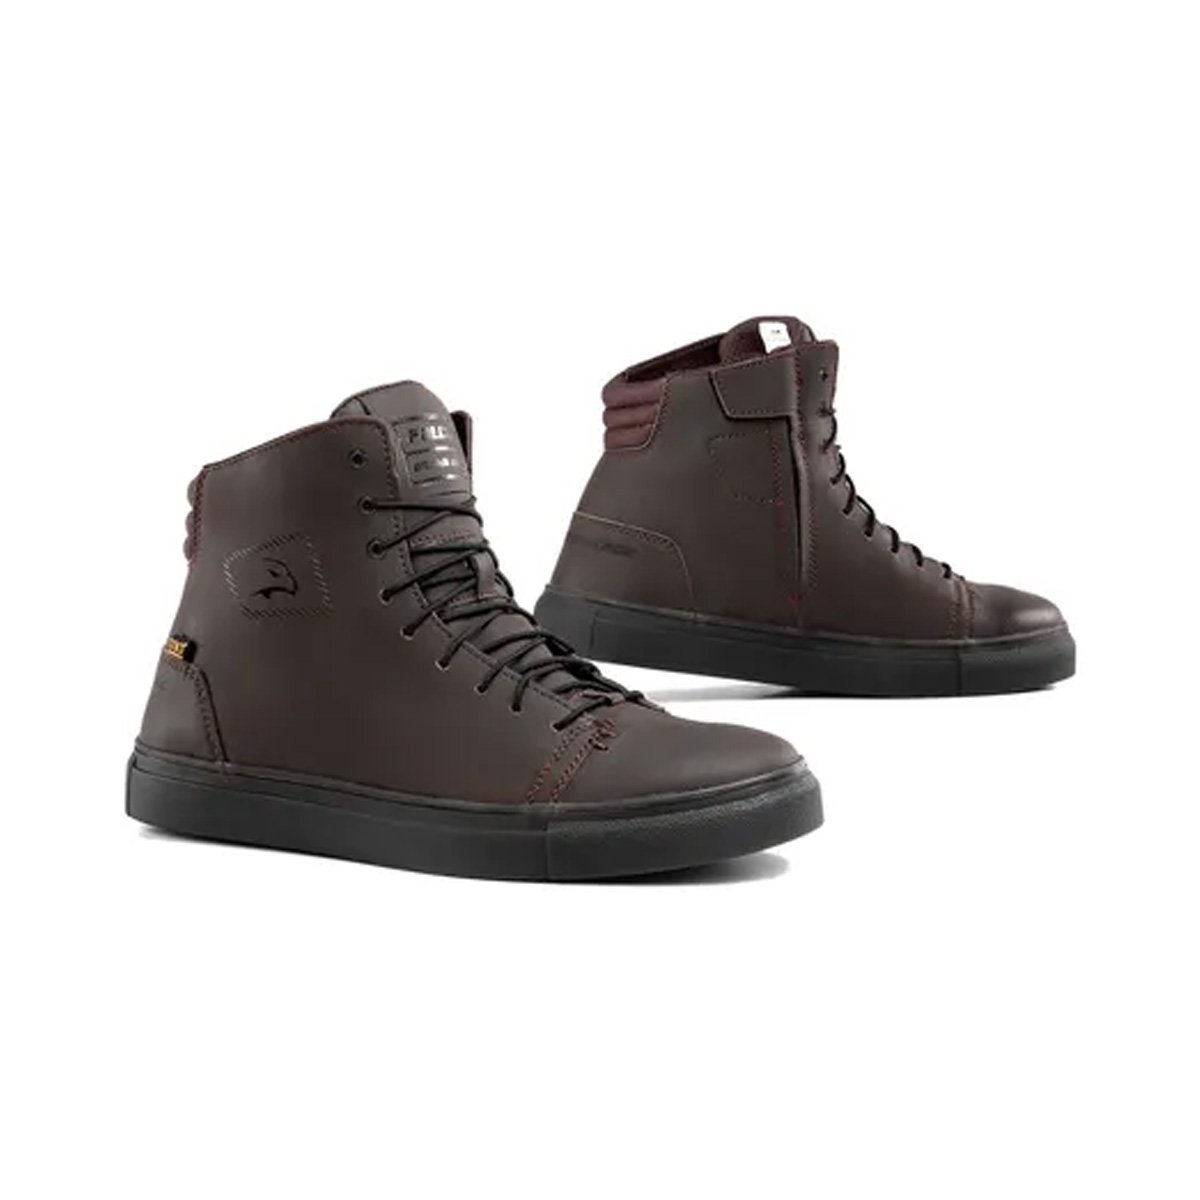 Image of EU Falco Nomad 2 Marron Chaussures Taille 47